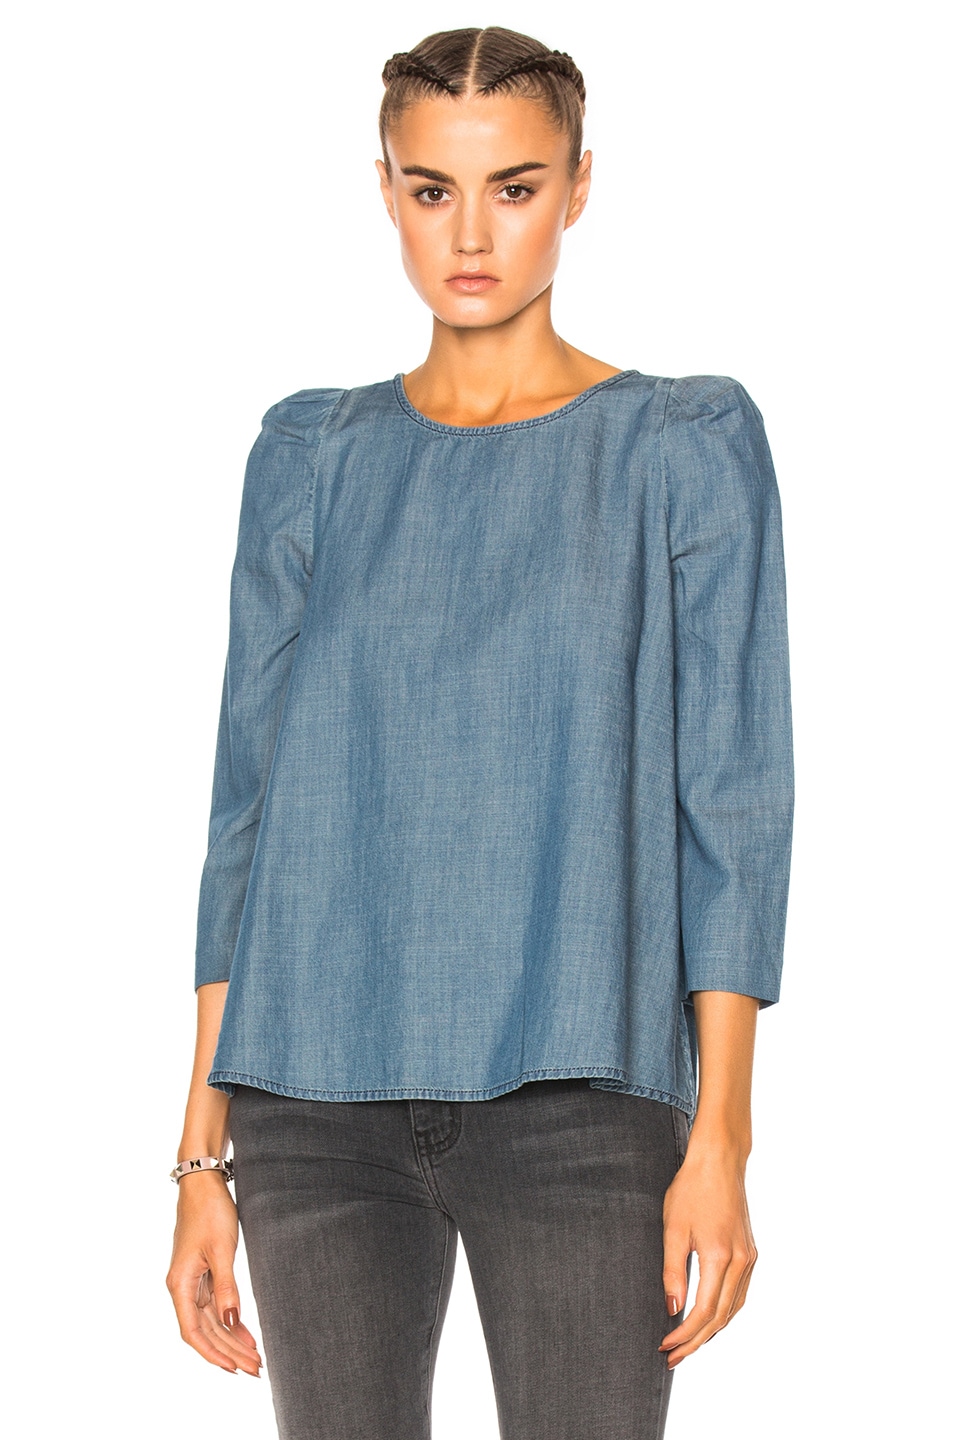 Image 1 of The Great Darling Shirt in Rafter Wash